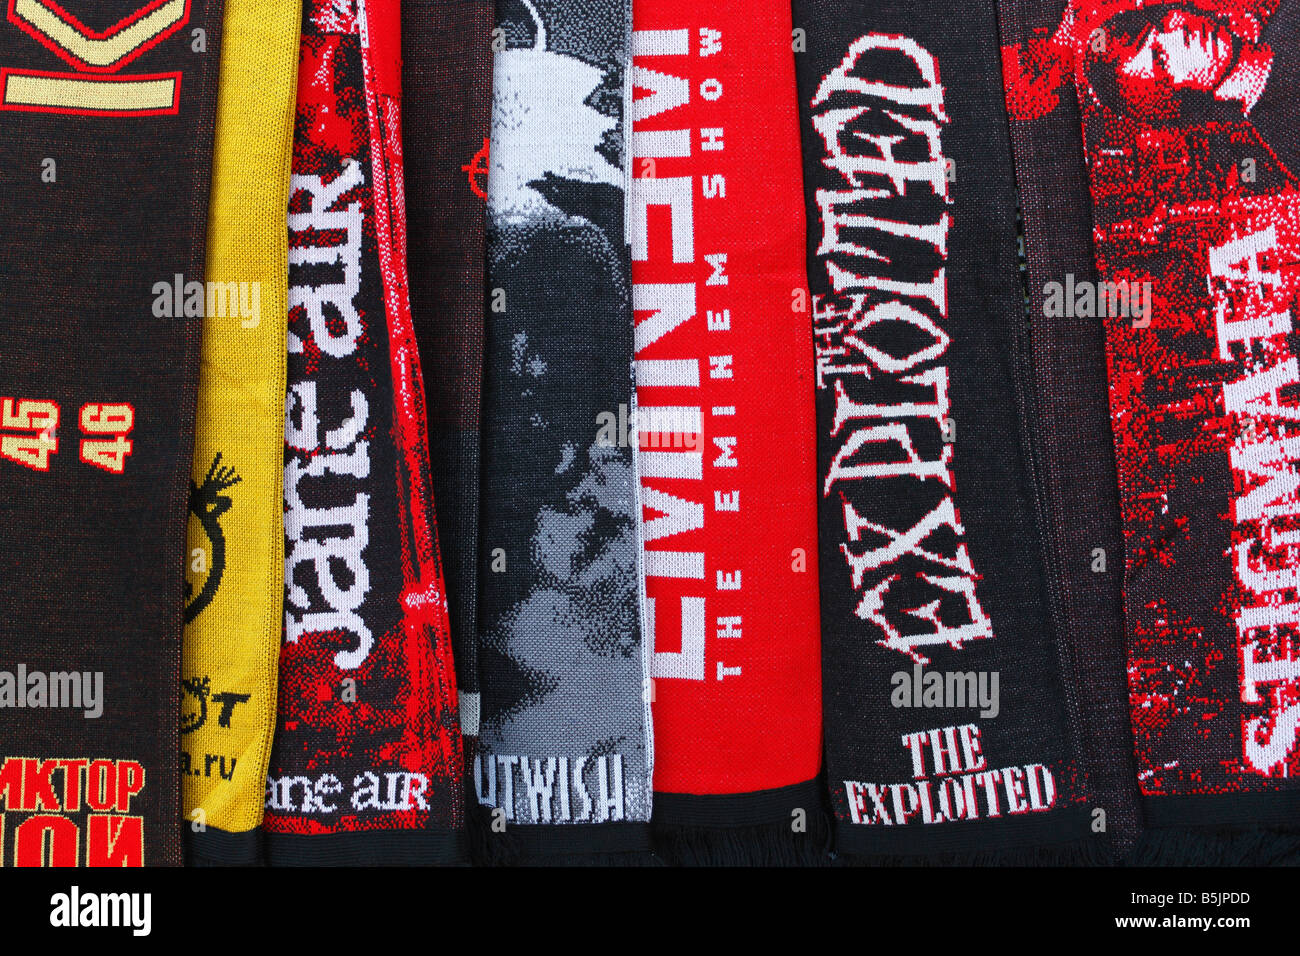 Scarves for musical fans Stock Photo